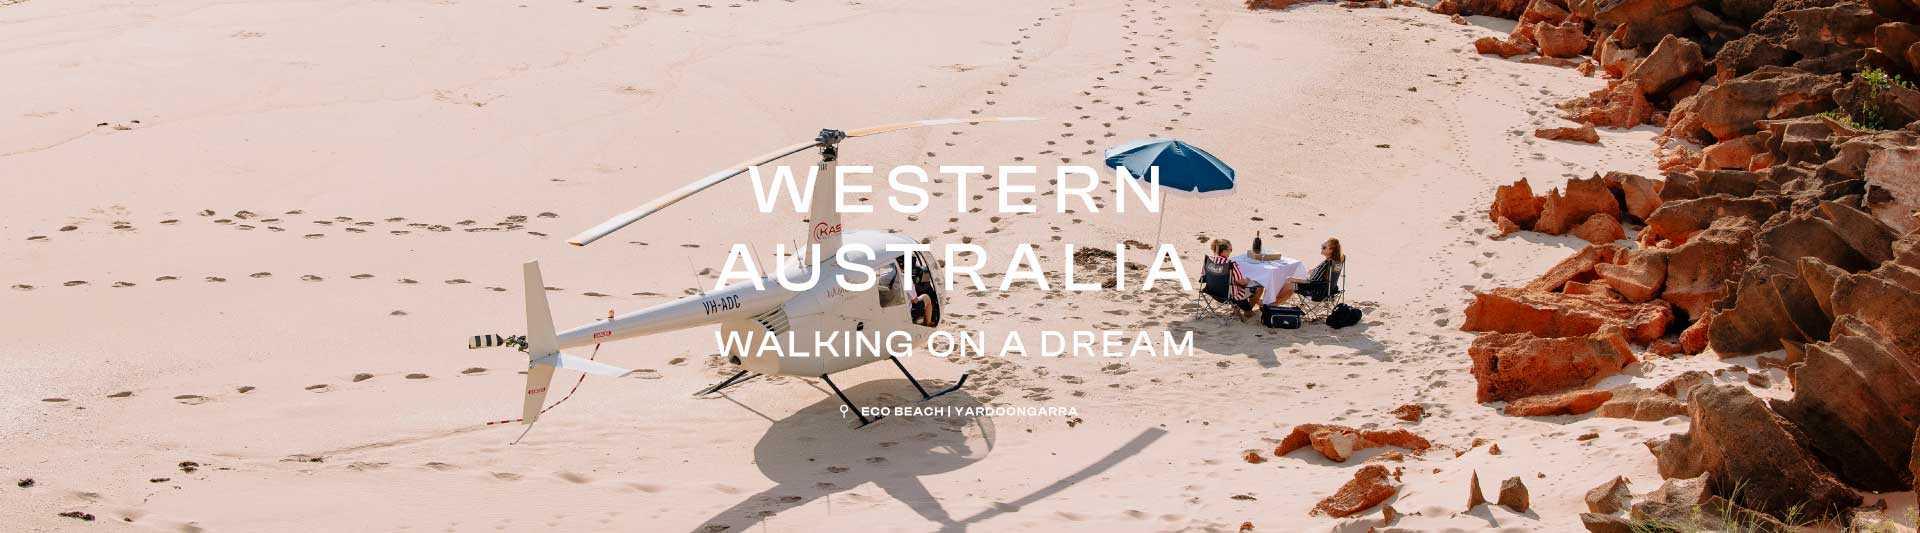 Step into a dream in the kimberley campaign header eco